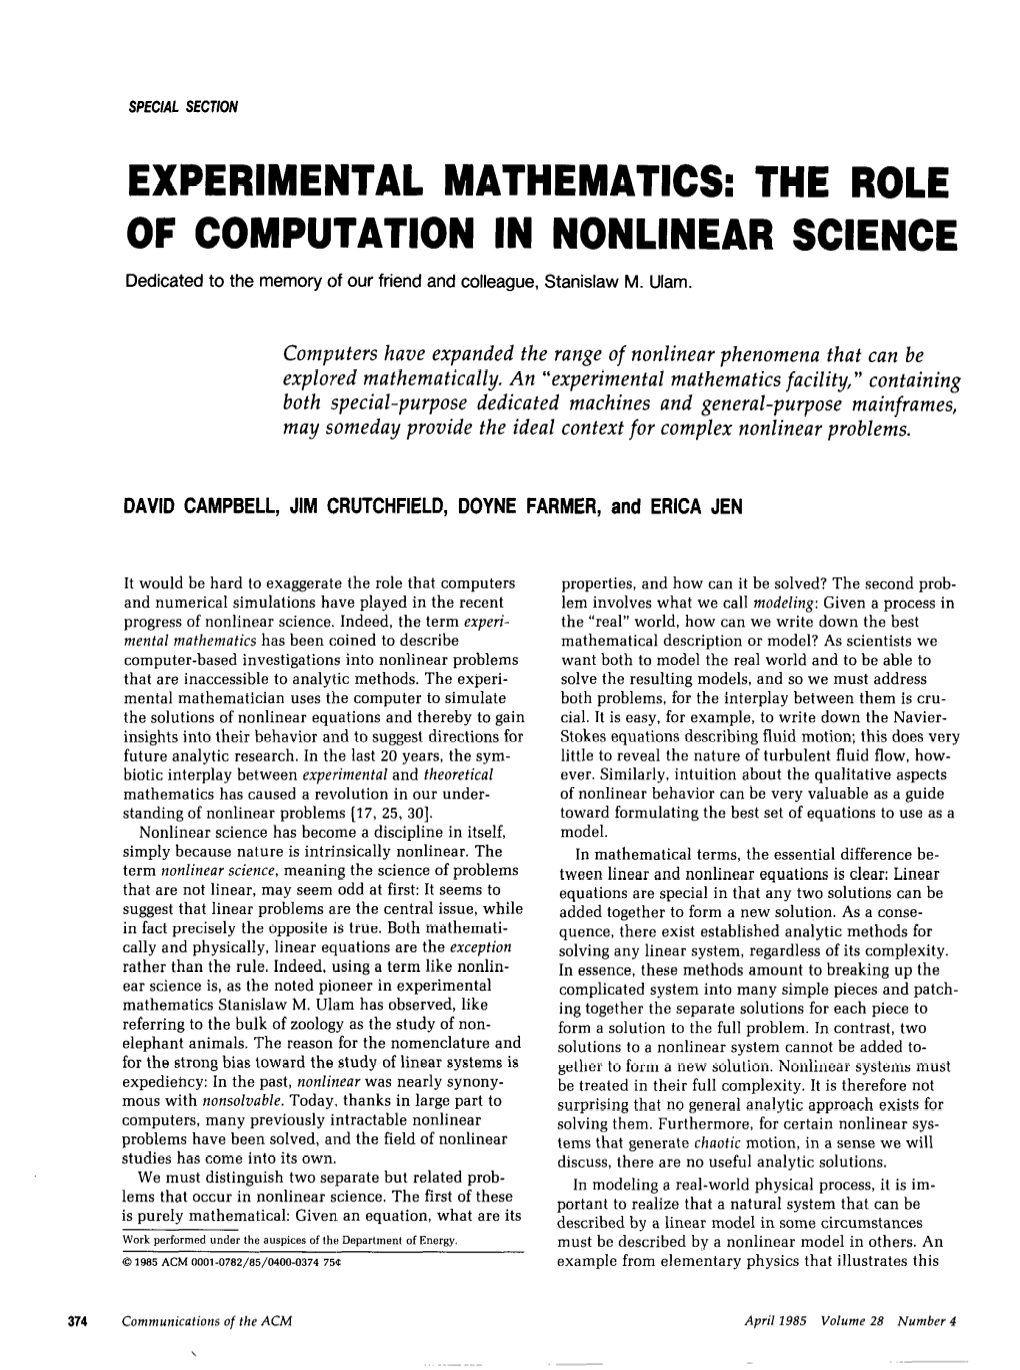 EXPERIMENTAL MATHEMATICS: the ROLE of COMPUTATION in NONLINEAR SCIENCE Dedicated to the Memory of Our Friend and Colleague, Stanislaw M